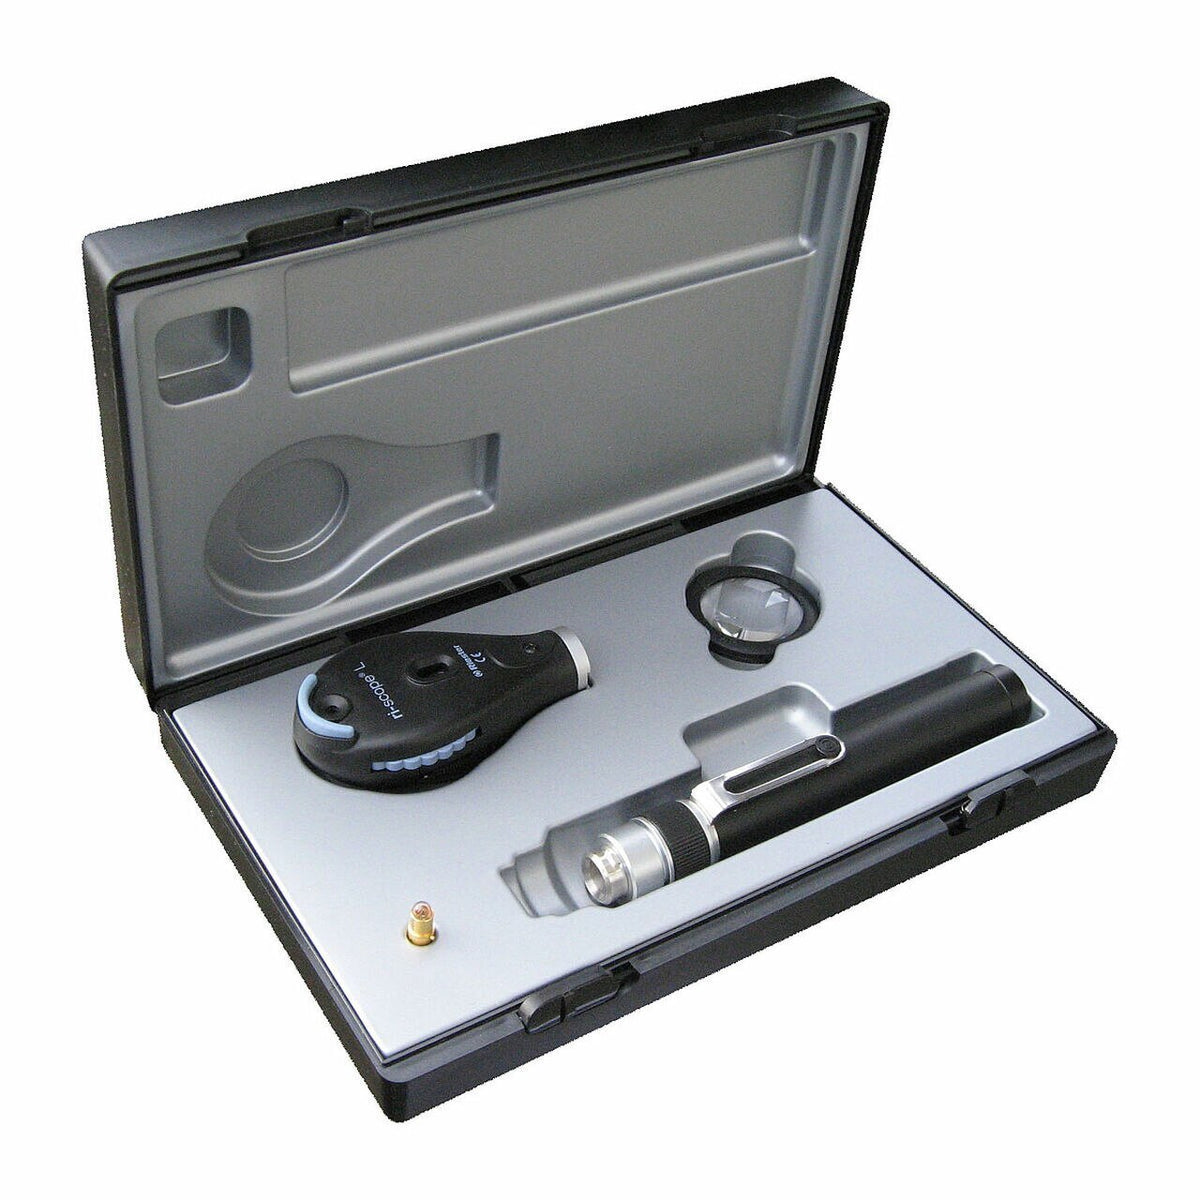 Riester Ri-Scope L Ophthalmoscope LED 3.5 V AA Handle for 2 x Lithium Batteries